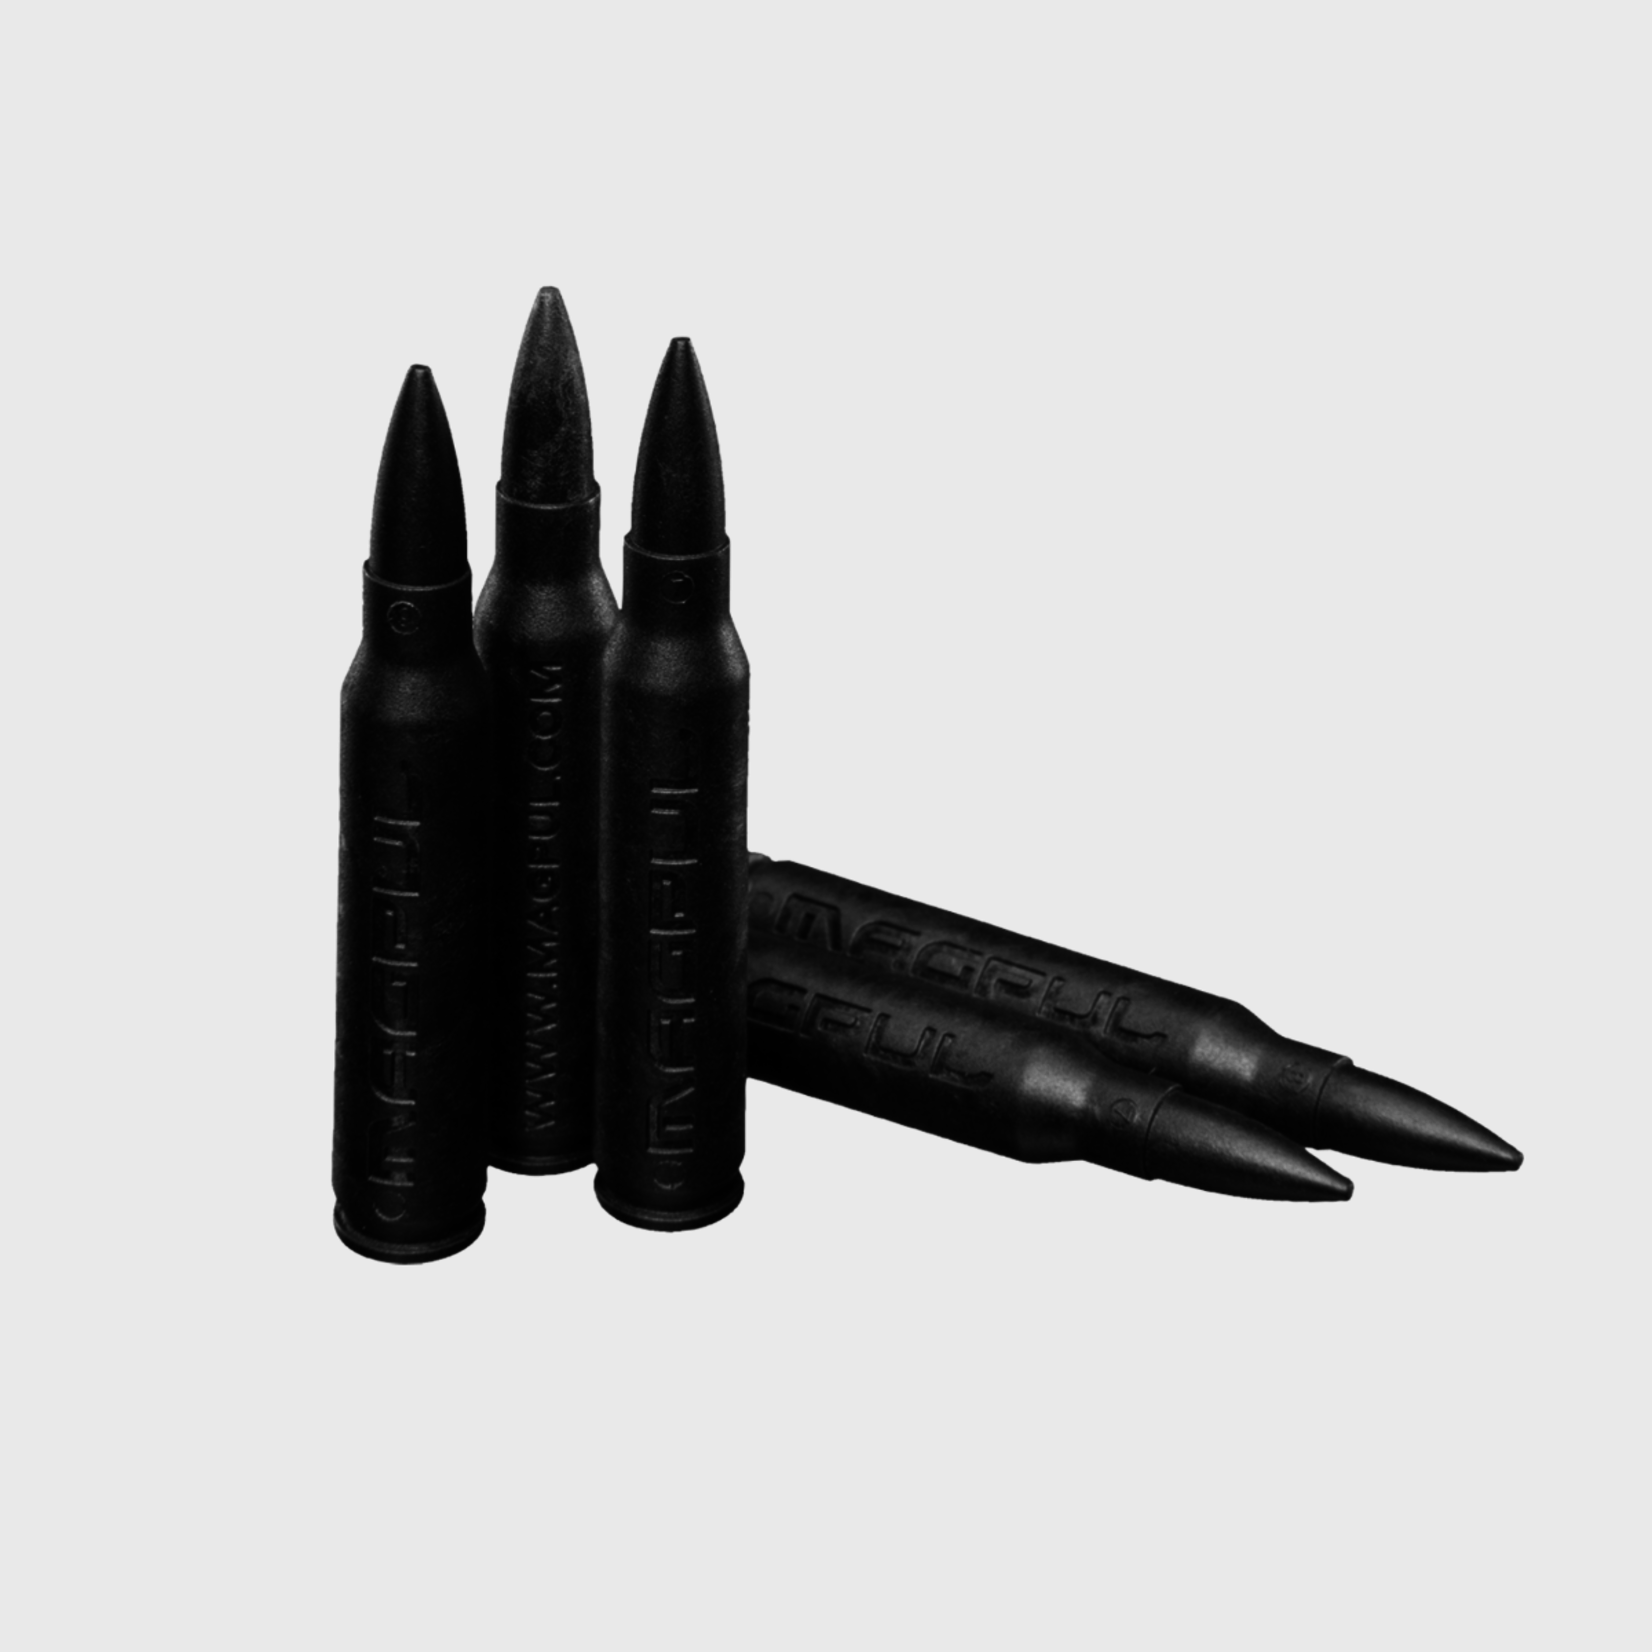 Magpul Magpul 5.56mm Dummy Rounds (5-pack)